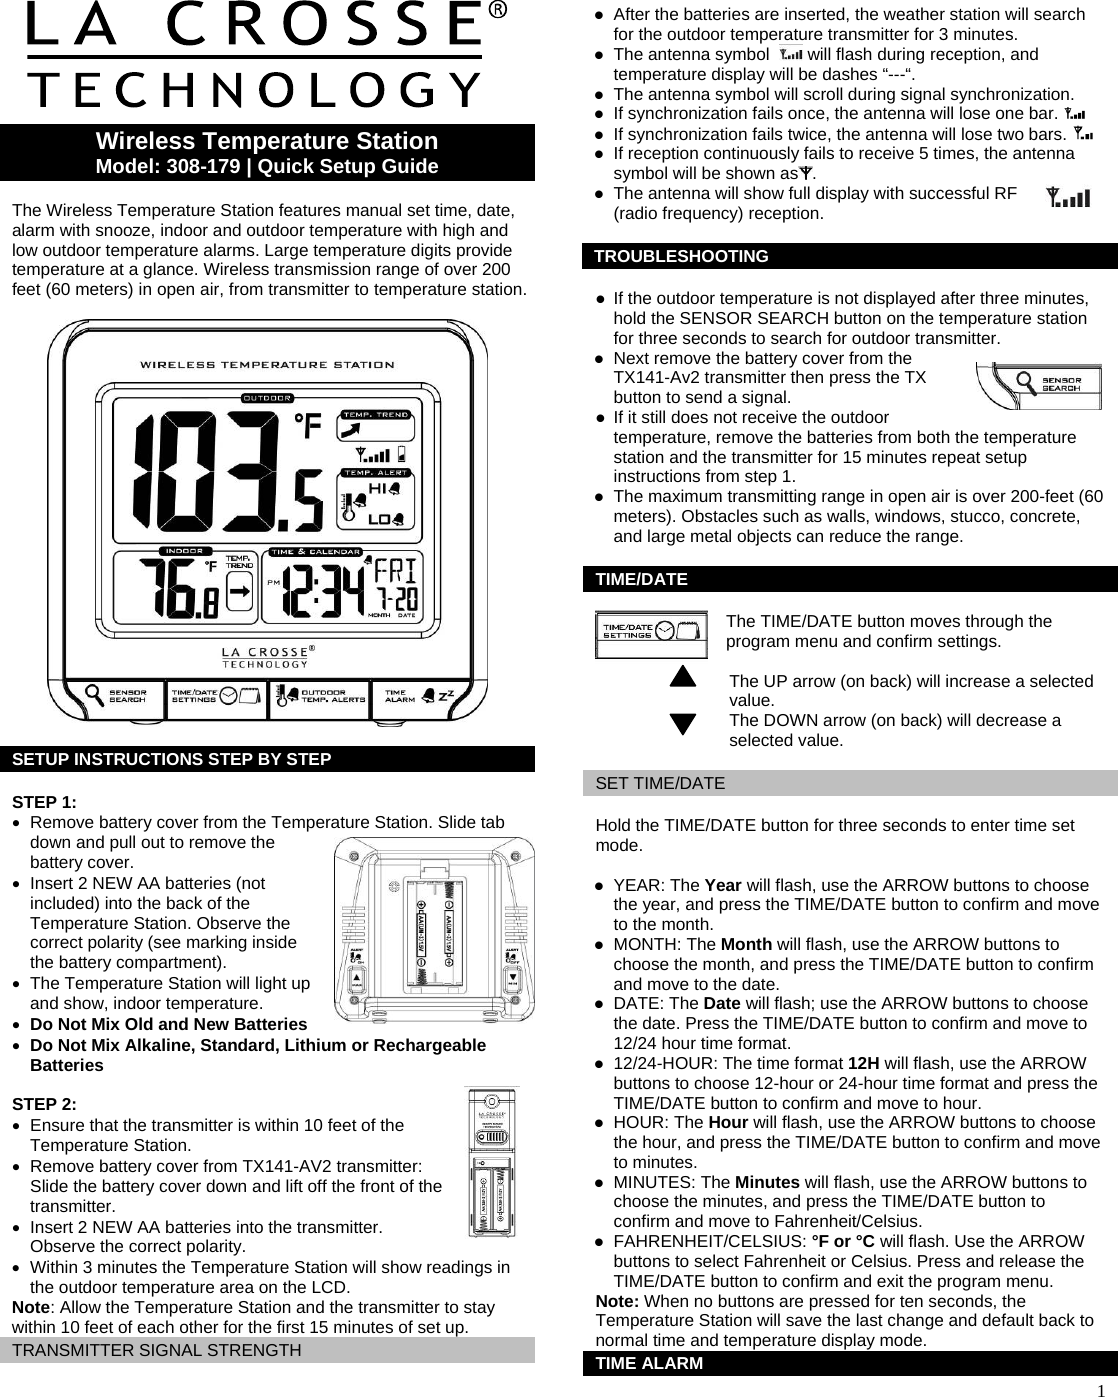  1     Wireless Temperature Station Model: 308-179 | Quick Setup Guide  The Wireless Temperature Station features manual set time, date, alarm with snooze, indoor and outdoor temperature with high and low outdoor temperature alarms. Large temperature digits provide temperature at a glance. Wireless transmission range of over 200 feet (60 meters) in open air, from transmitter to temperature station.    SETUP INSTRUCTIONS STEP BY STEP   STEP 1: •  Remove battery cover from the Temperature Station. Slide tab down and pull out to remove the battery cover.  •  Insert 2 NEW AA batteries (not included) into the back of the Temperature Station. Observe the correct polarity (see marking inside the battery compartment).  •  The Temperature Station will light up and show, indoor temperature. • Do Not Mix Old and New Batteries • Do Not Mix Alkaline, Standard, Lithium or Rechargeable Batteries   STEP 2: •  Ensure that the transmitter is within 10 feet of the Temperature Station. •  Remove battery cover from TX141-AV2 transmitter: Slide the battery cover down and lift off the front of the transmitter. •  Insert 2 NEW AA batteries into the transmitter. Observe the correct polarity. •  Within 3 minutes the Temperature Station will show readings in the outdoor temperature area on the LCD. Note: Allow the Temperature Station and the transmitter to stay within 10 feet of each other for the first 15 minutes of set up.  TRANSMITTER SIGNAL STRENGTH  z After the batteries are inserted, the weather station will search for the outdoor temperature transmitter for 3 minutes. z The antenna symbol    will flash during reception, and temperature display will be dashes “---“. z The antenna symbol will scroll during signal synchronization. z If synchronization fails once, the antenna will lose one bar.   z If synchronization fails twice, the antenna will lose two bars.   z If reception continuously fails to receive 5 times, the antenna symbol will be shown as .  z The antenna will show full display with successful RF (radio frequency) reception.   TROUBLESHOOTING  z If the outdoor temperature is not displayed after three minutes, hold the SENSOR SEARCH button on the temperature station for three seconds to search for outdoor transmitter.  z Next remove the battery cover from the TX141-Av2 transmitter then press the TX button to send a signal. z If it still does not receive the outdoor temperature, remove the batteries from both the temperature station and the transmitter for 15 minutes repeat setup instructions from step 1.  z The maximum transmitting range in open air is over 200-feet (60  meters). Obstacles such as walls, windows, stucco, concrete, and large metal objects can reduce the range.  TIME/DATE   The TIME/DATE button moves through the program menu and confirm settings.                               The UP arrow (on back) will increase a selected                               value.                             The DOWN arrow (on back) will decrease a                              selected value.  SET TIME/DATE  Hold the TIME/DATE button for three seconds to enter time set mode.  z YEAR: The Year will flash, use the ARROW buttons to choose the year, and press the TIME/DATE button to confirm and move to the month. z MONTH: The Month will flash, use the ARROW buttons to choose the month, and press the TIME/DATE button to confirm and move to the date. z DATE: The Date will flash; use the ARROW buttons to choose the date. Press the TIME/DATE button to confirm and move to 12/24 hour time format. z 12/24-HOUR: The time format 12H will flash, use the ARROW buttons to choose 12-hour or 24-hour time format and press the TIME/DATE button to confirm and move to hour. z HOUR: The Hour will flash, use the ARROW buttons to choose the hour, and press the TIME/DATE button to confirm and move to minutes. z MINUTES: The Minutes will flash, use the ARROW buttons to choose the minutes, and press the TIME/DATE button to confirm and move to Fahrenheit/Celsius. z FAHRENHEIT/CELSIUS: °F or °C will flash. Use the ARROW buttons to select Fahrenheit or Celsius. Press and release the TIME/DATE button to confirm and exit the program menu. Note: When no buttons are pressed for ten seconds, the Temperature Station will save the last change and default back to normal time and temperature display mode. TIME ALARM 